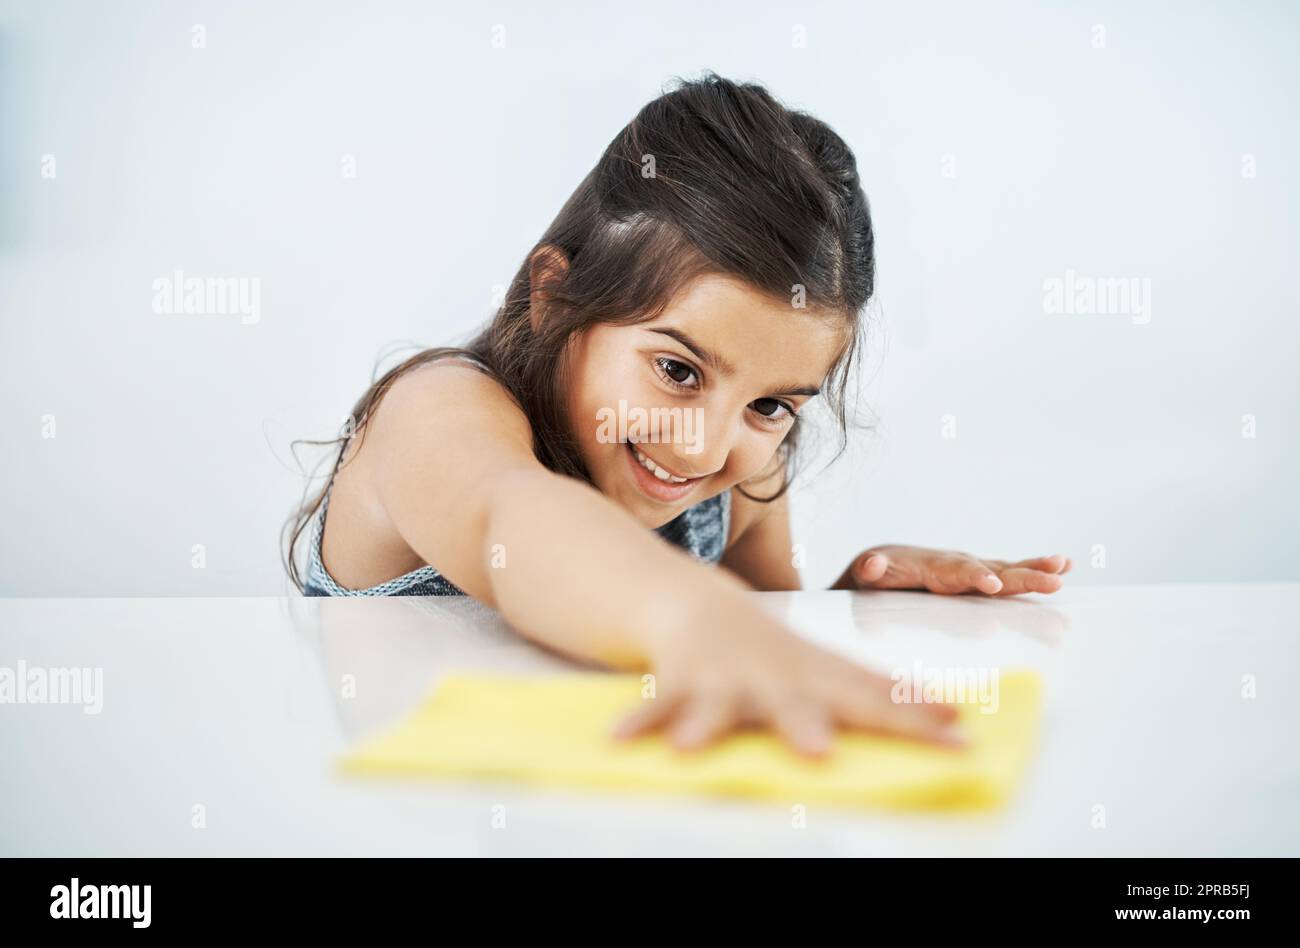 I reached it. an adorable little girl helping out with chores at home. Stock Photo